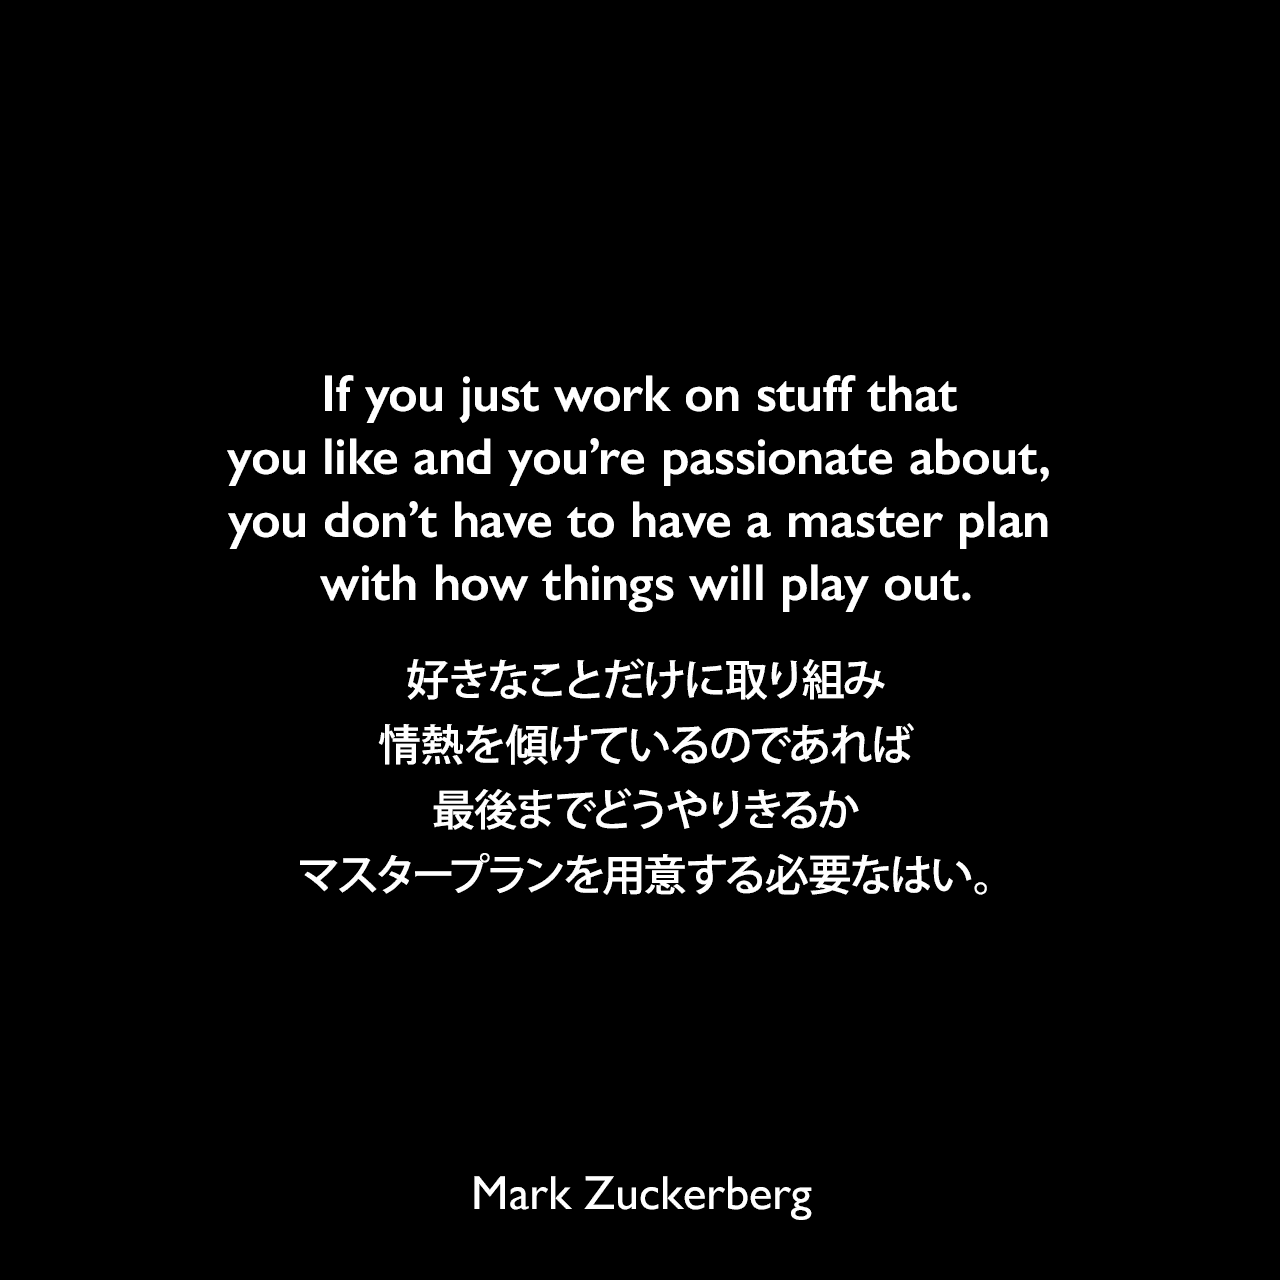 If you just work on stuff that you like and you’re passionate about, you don’t have to have a master plan with how things will play out.好きなことだけに取り組み、情熱を傾けているのであれば、最後までどうやりきるかマスタープランを用意する必要なはい。Mark Zuckerberg